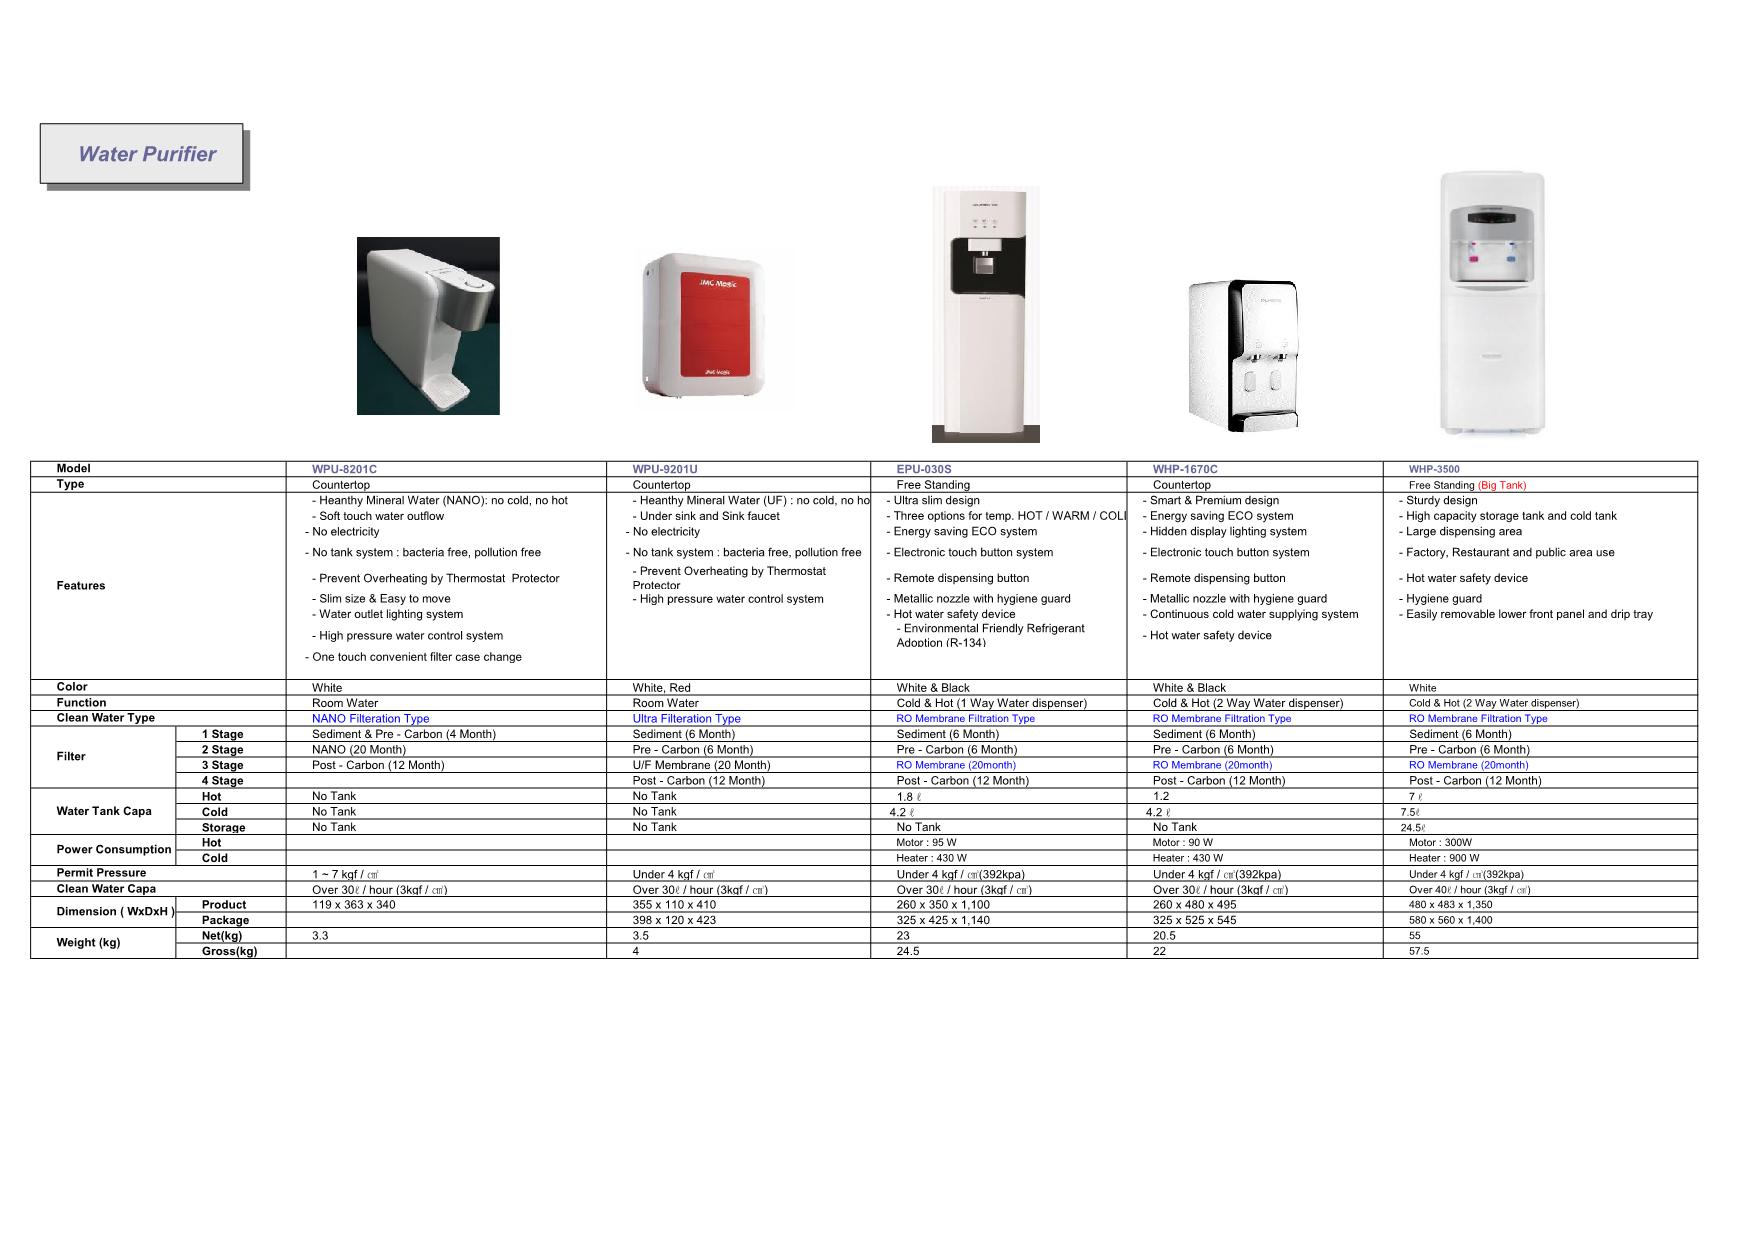 <a href="https://poem.a-tems.com/wp-content/uploads/2019/11/018_Water-Purifier-Total-Price_20191114_Internet.pdf">Water Purifier Total Price</a>